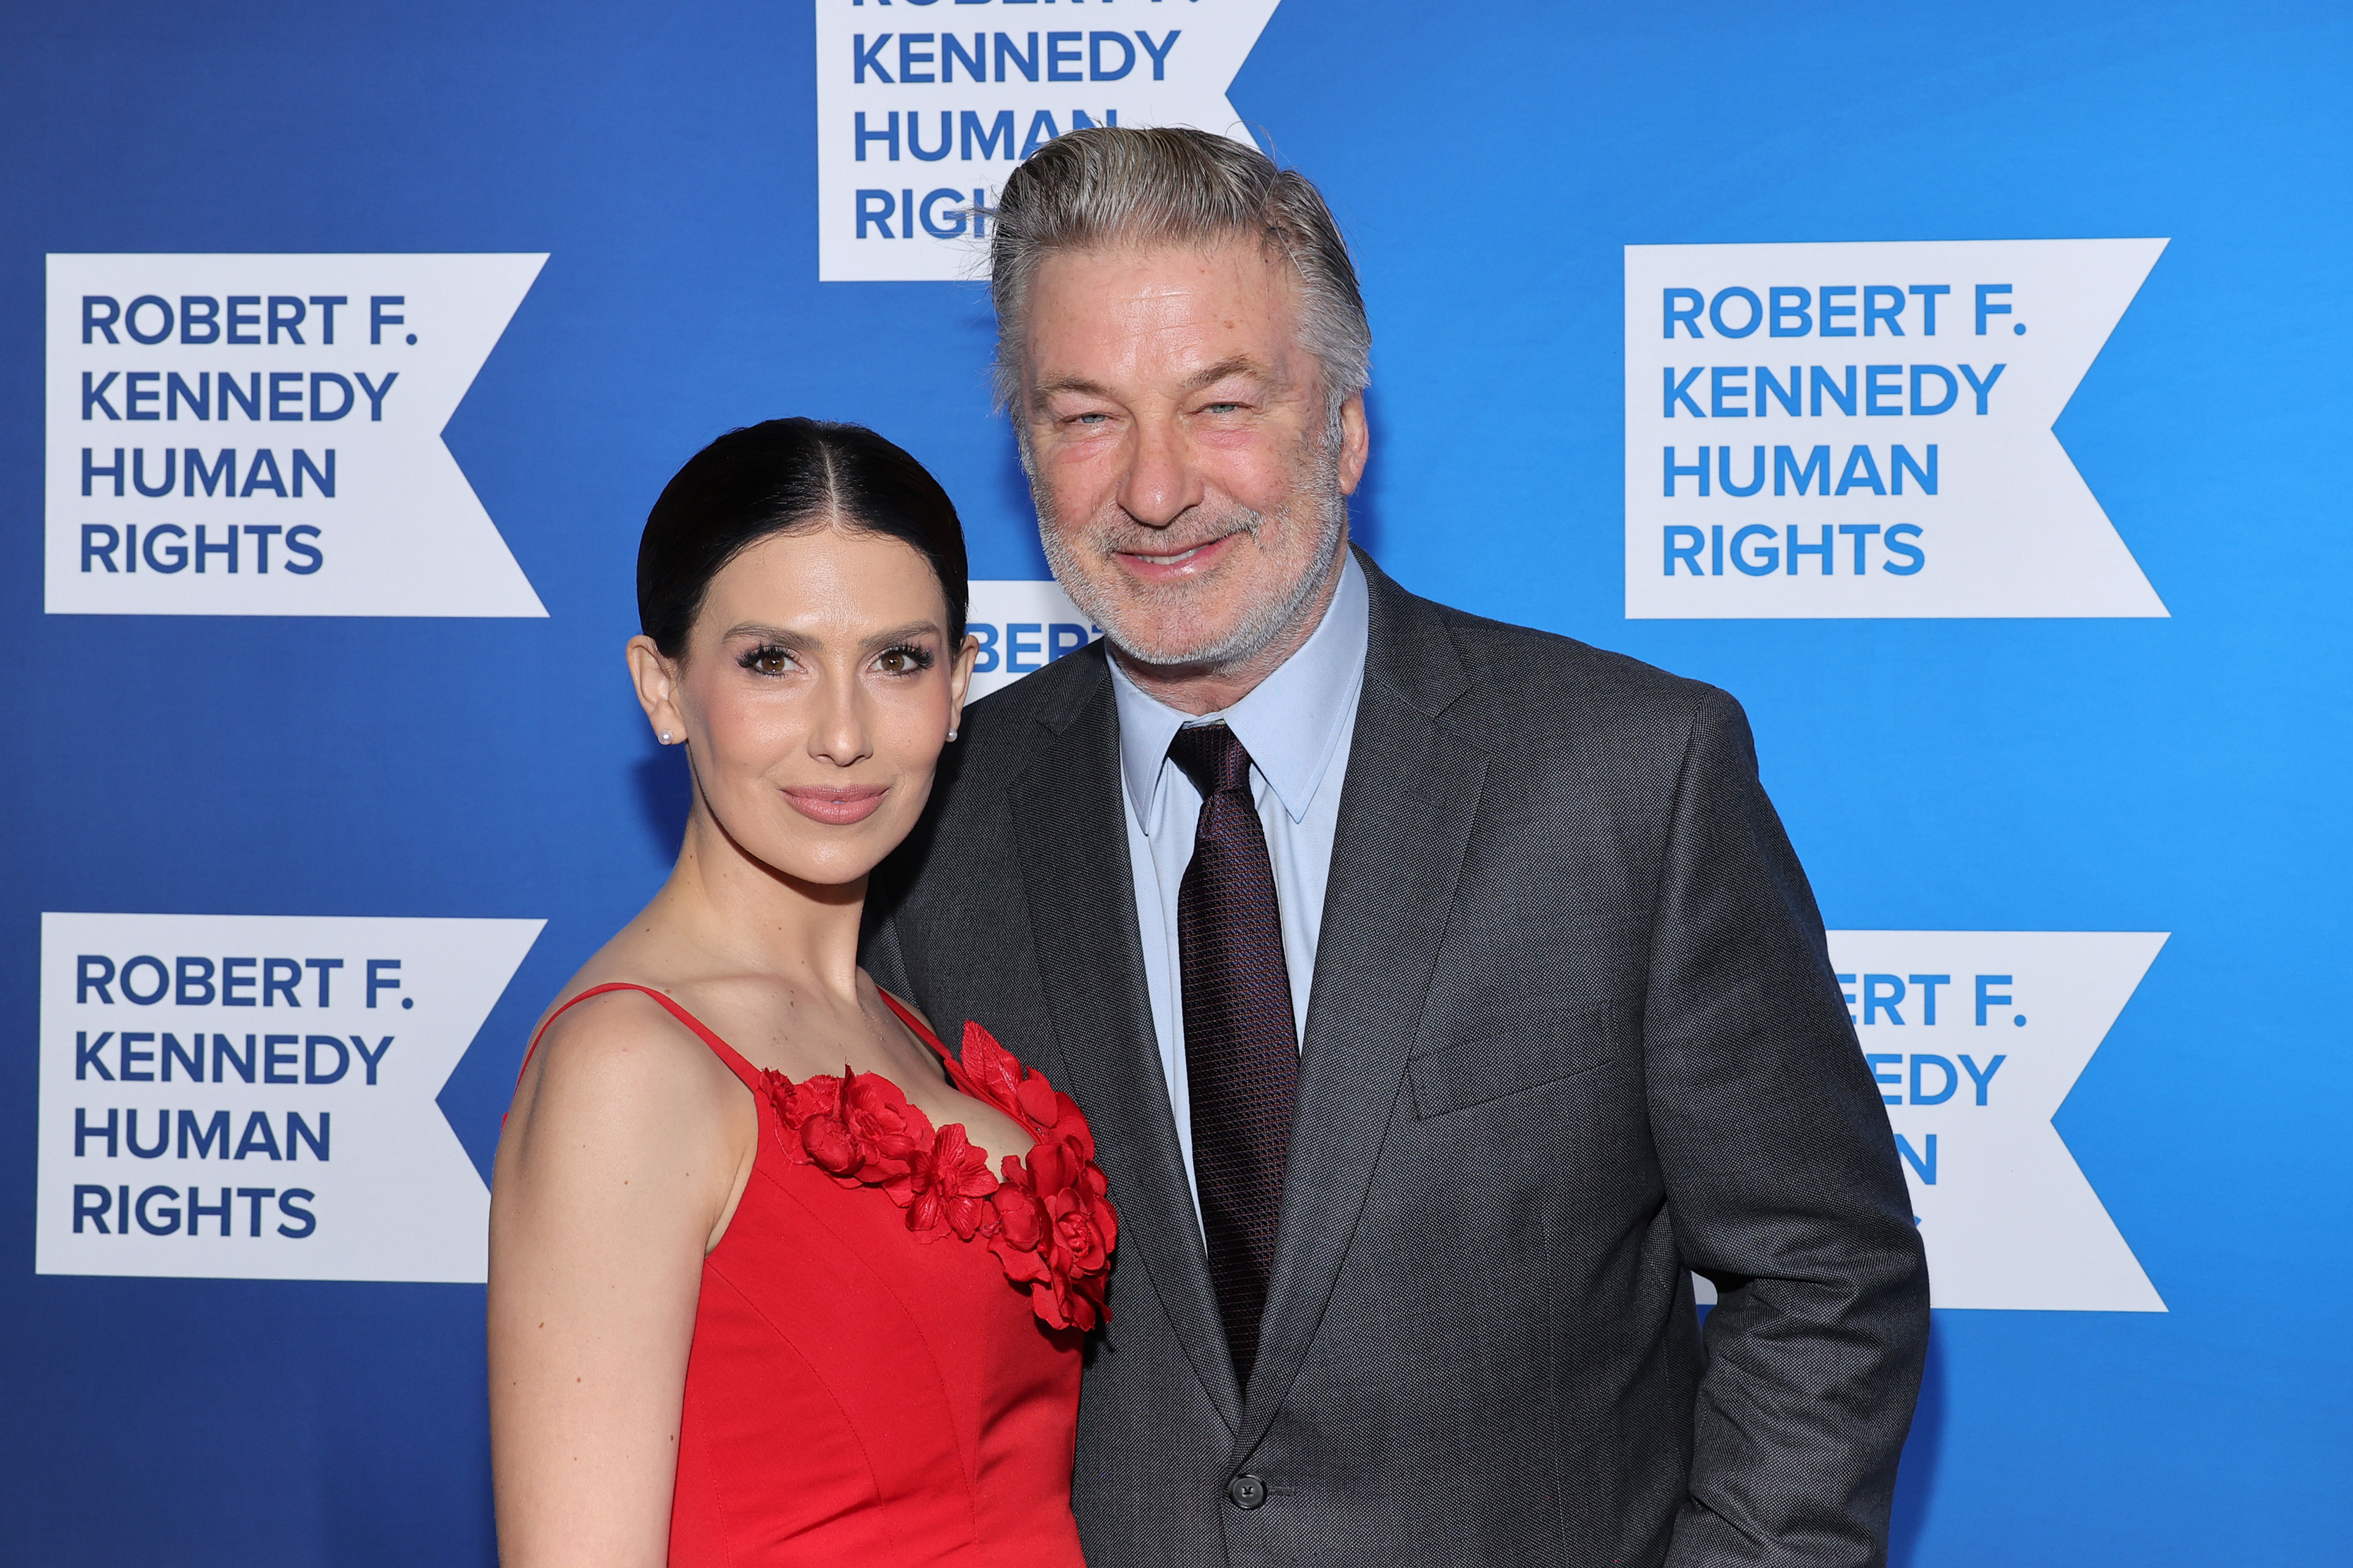  Hilaria Baldwin and Alec Baldwin attend the 2022 Robert F. Kennedy Human Rights Ripple of Hope Gala at New York Hilton on December 06, 2022 in New York City. (Photo by Mike Coppola/Getty Images for 2022 Robert F. Kennedy Human Rights Ripple of Hope Gala)